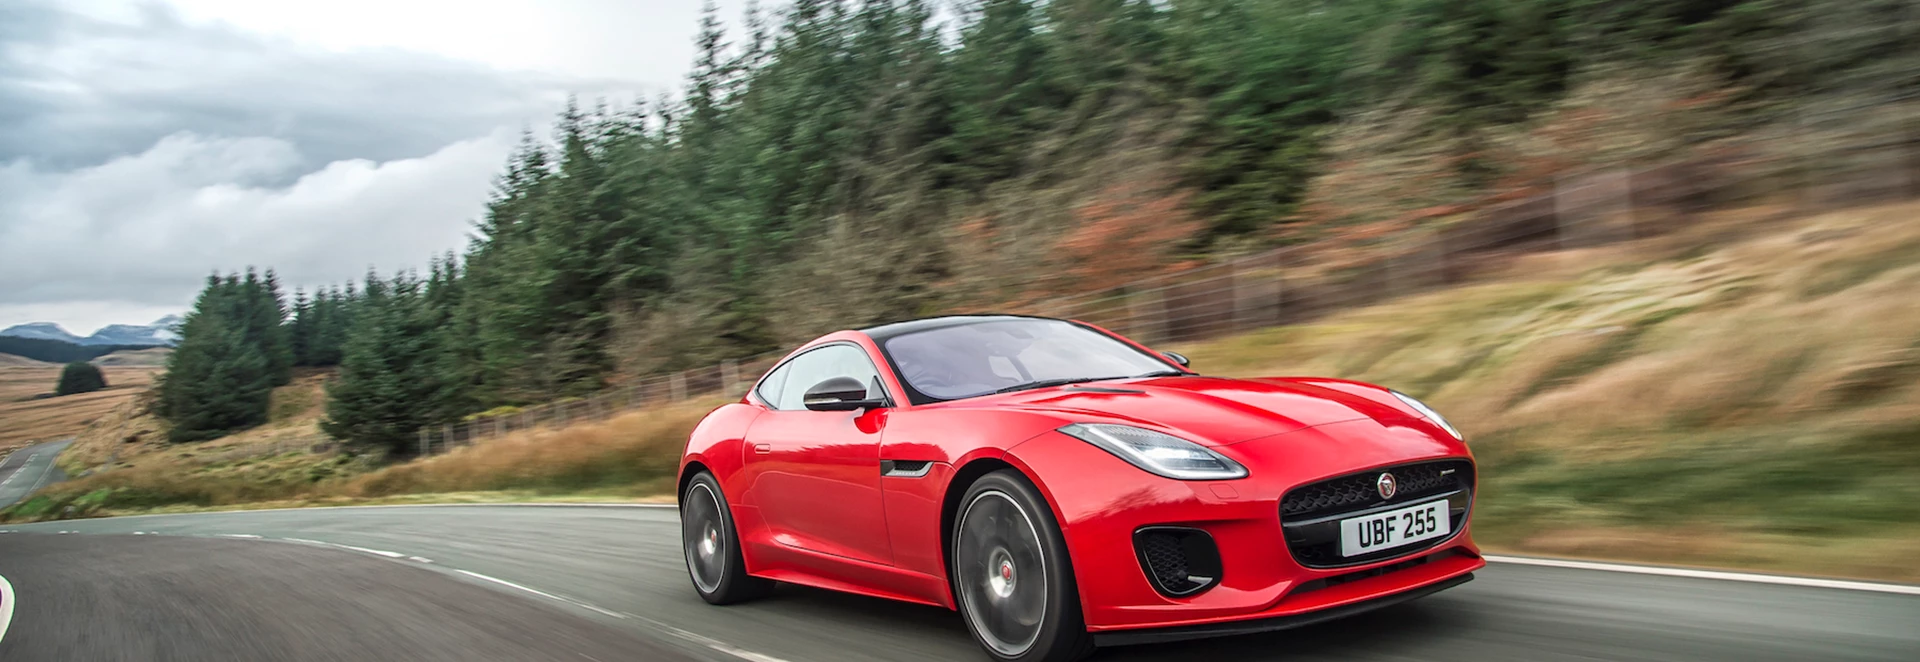 The new 2020 Jaguar F-Type set to use BMW engines 